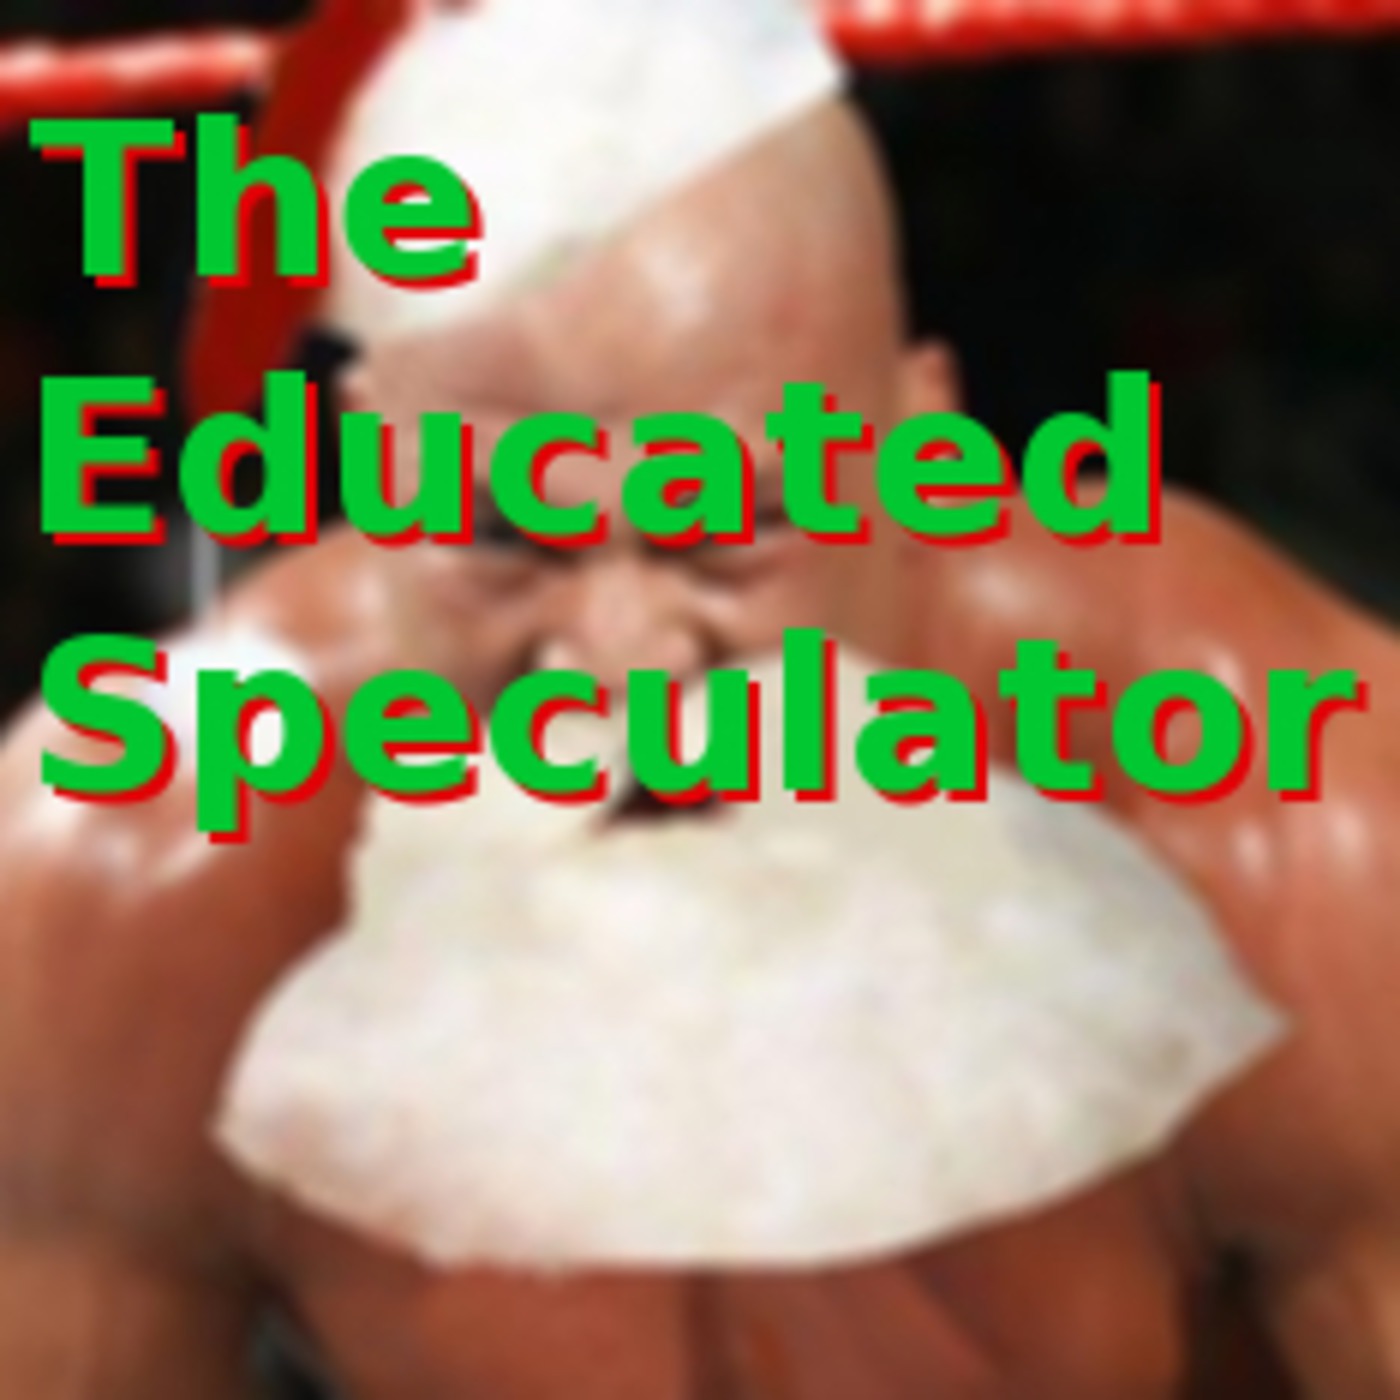 THE EDUCATED SPECULATOR